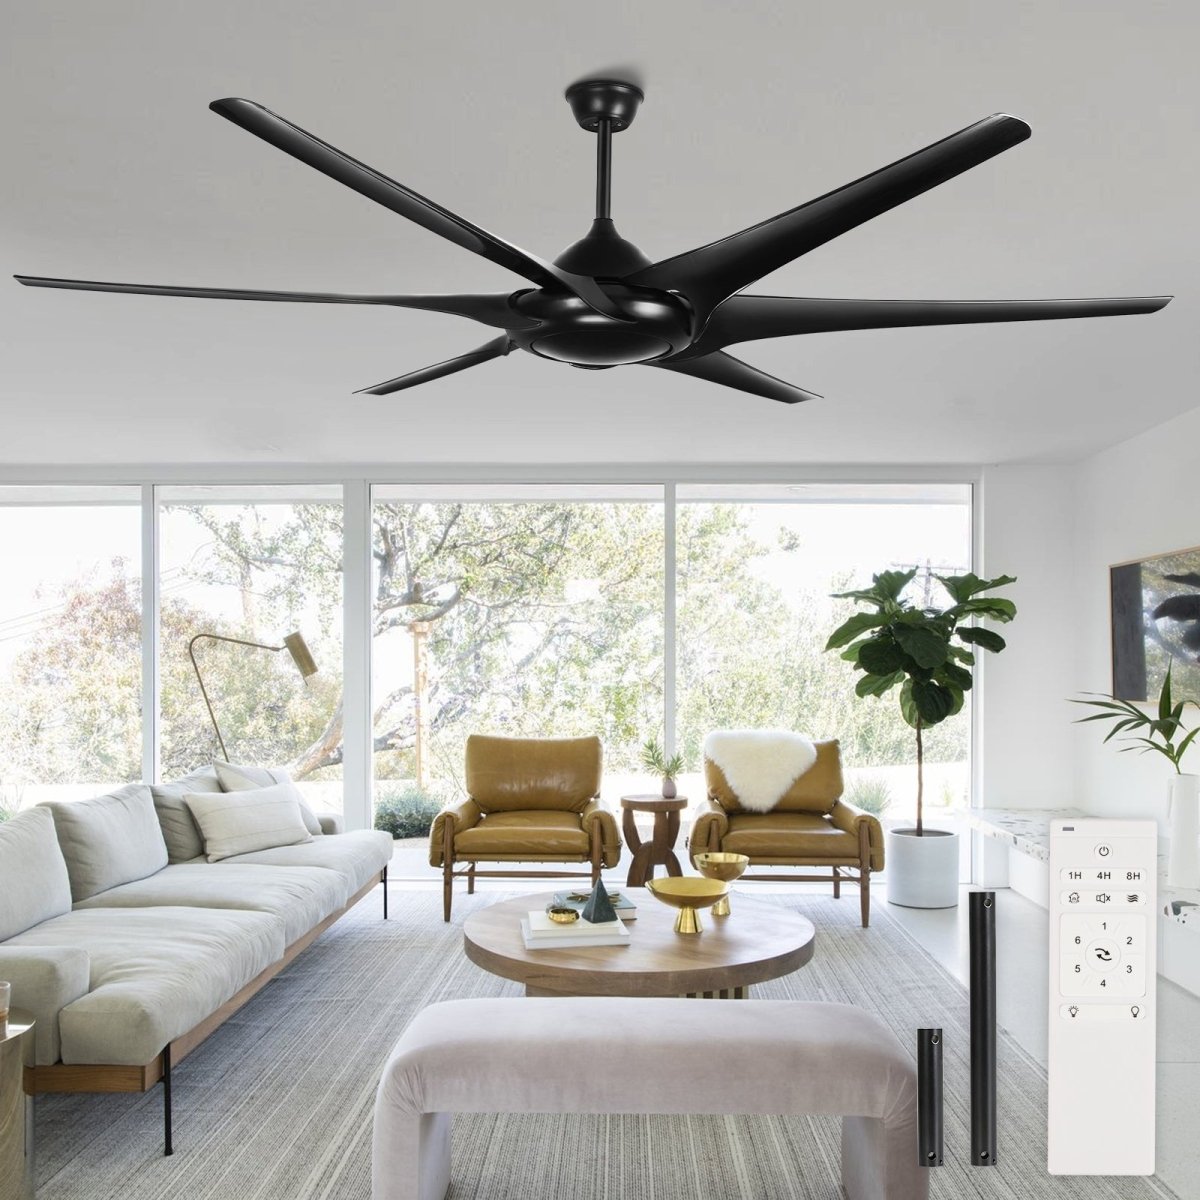 Black Farmhouse Ceiling Fan No Light, 80 / 100 Inch Large Ceiling Fans with Remote 6 Reversible Blades 6-Speed Home or Commercial Ceiling Fans for Outdoor Covered Porch Garage Shop, No LIght - WS-FNZ59-6-B 1 | DEPULEY